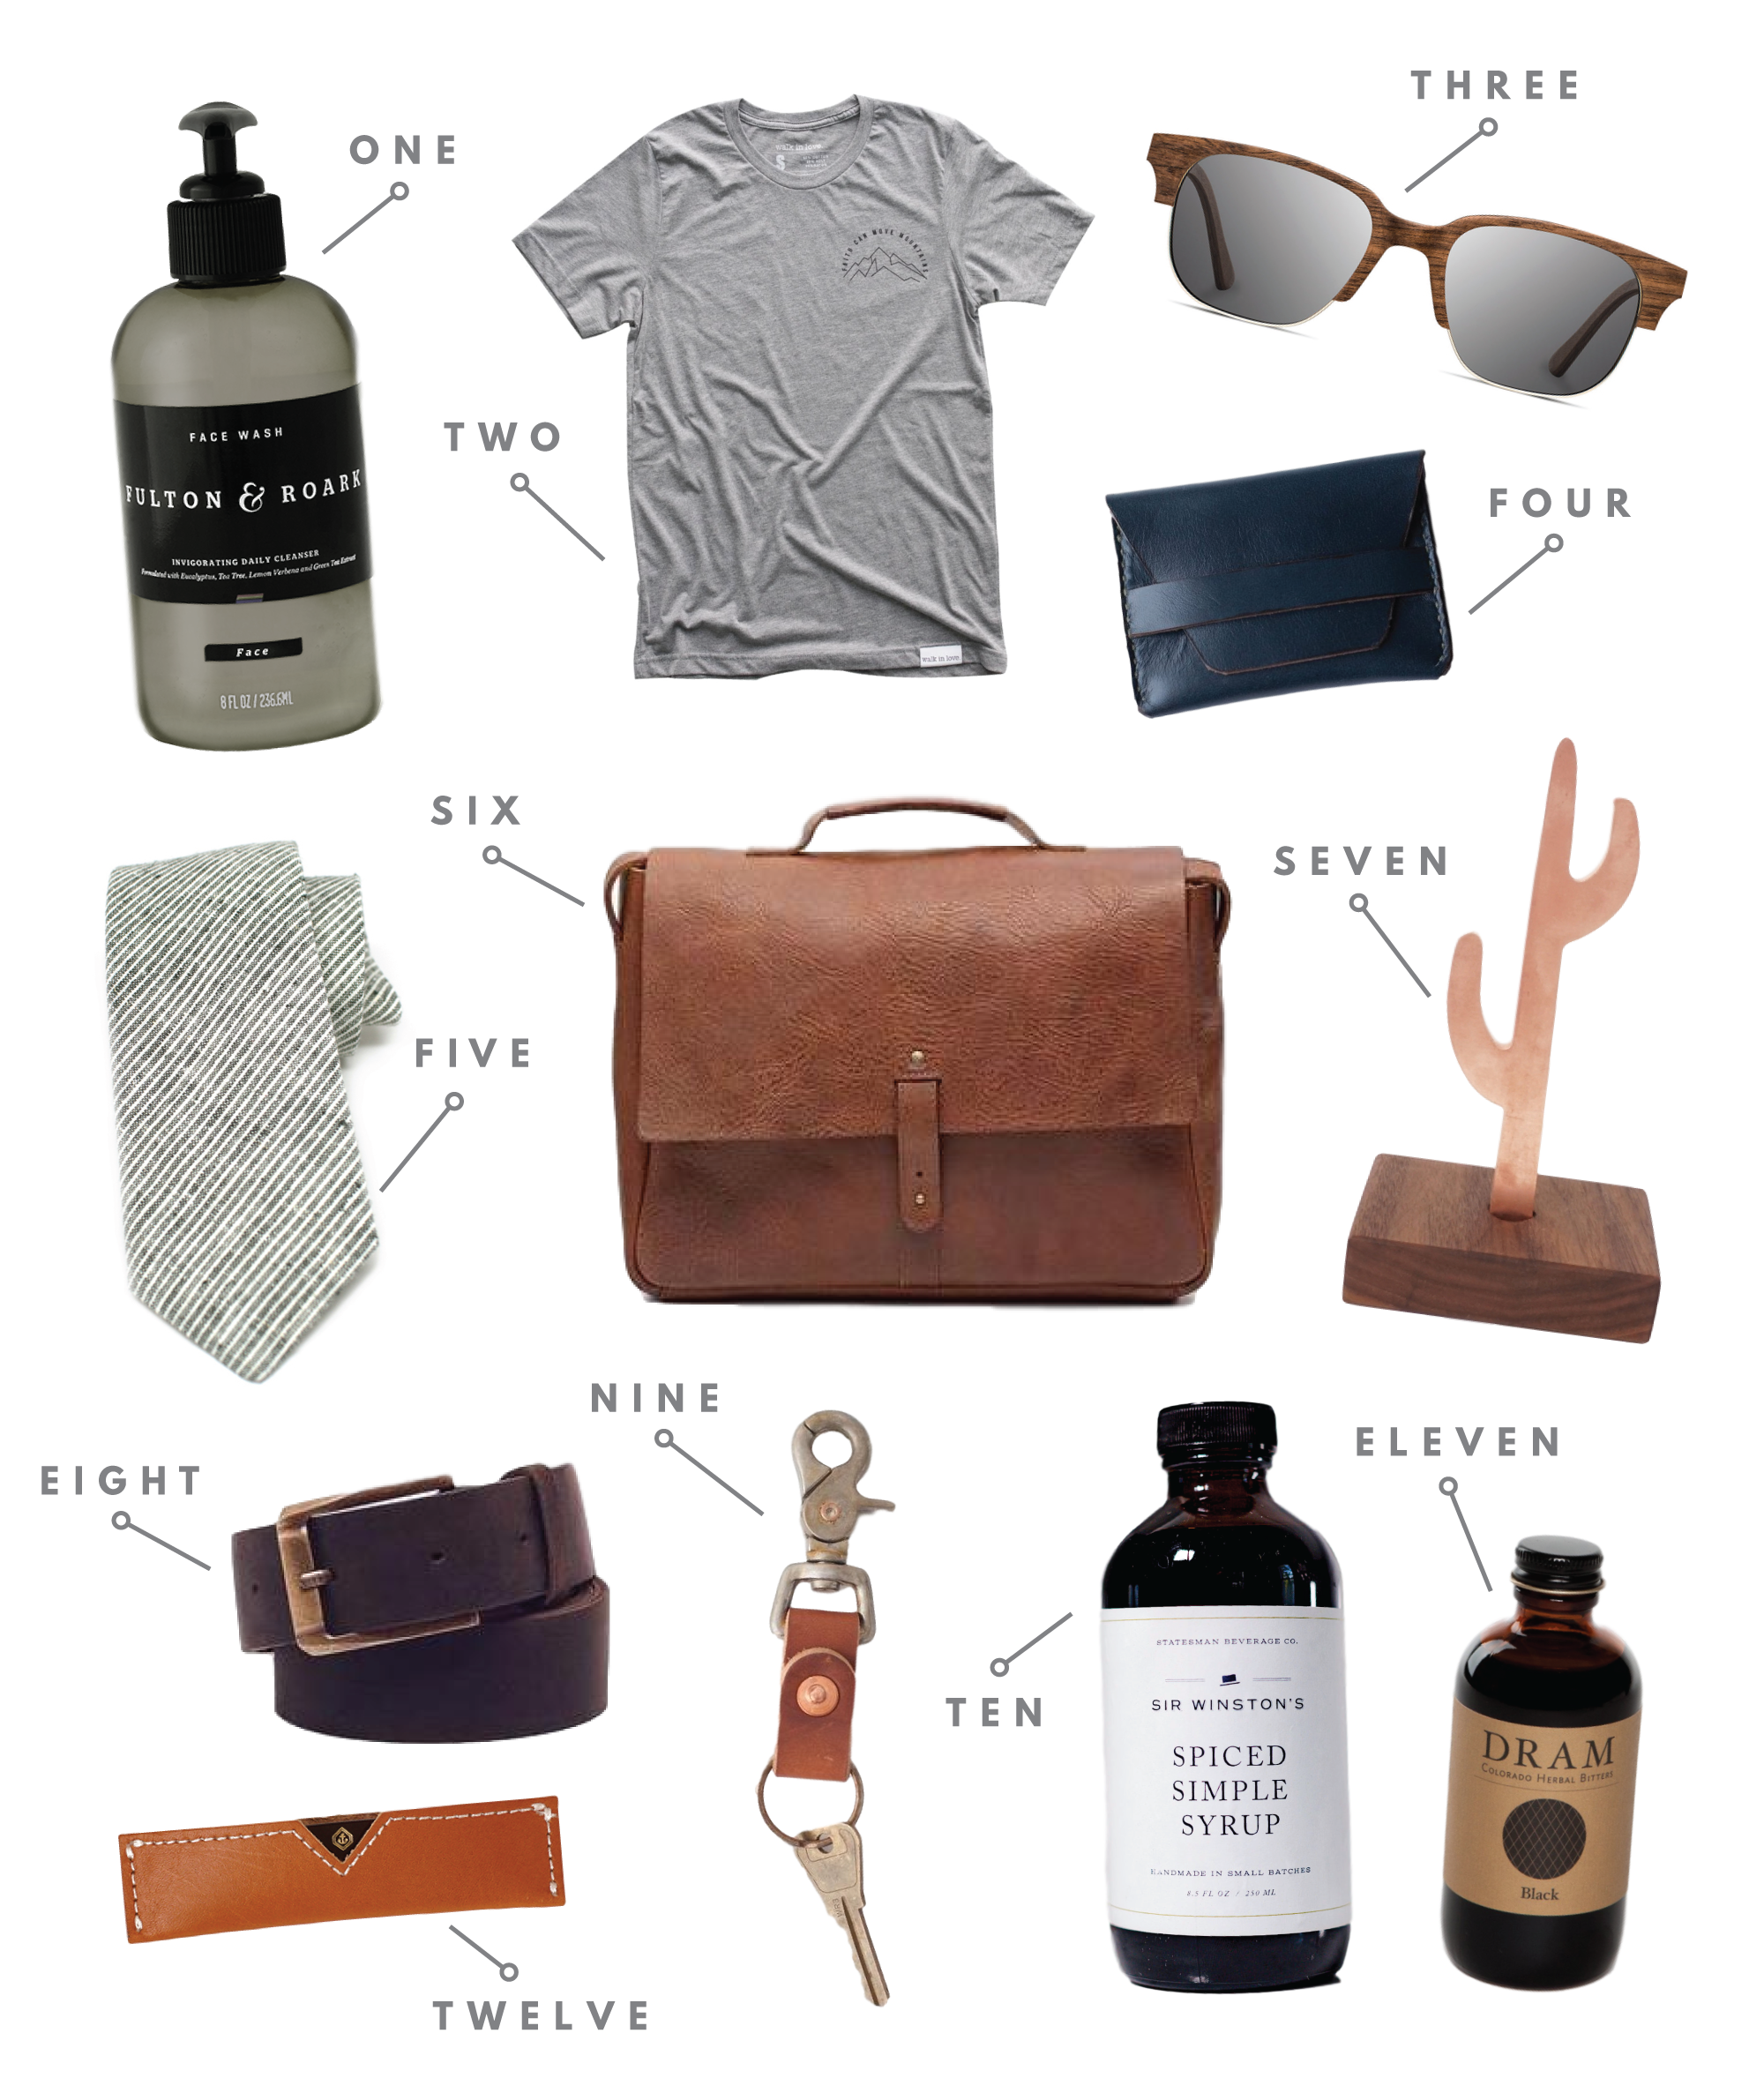 2017 Holiday Gift Guide - Gifts for Dad - Green Tie Studio